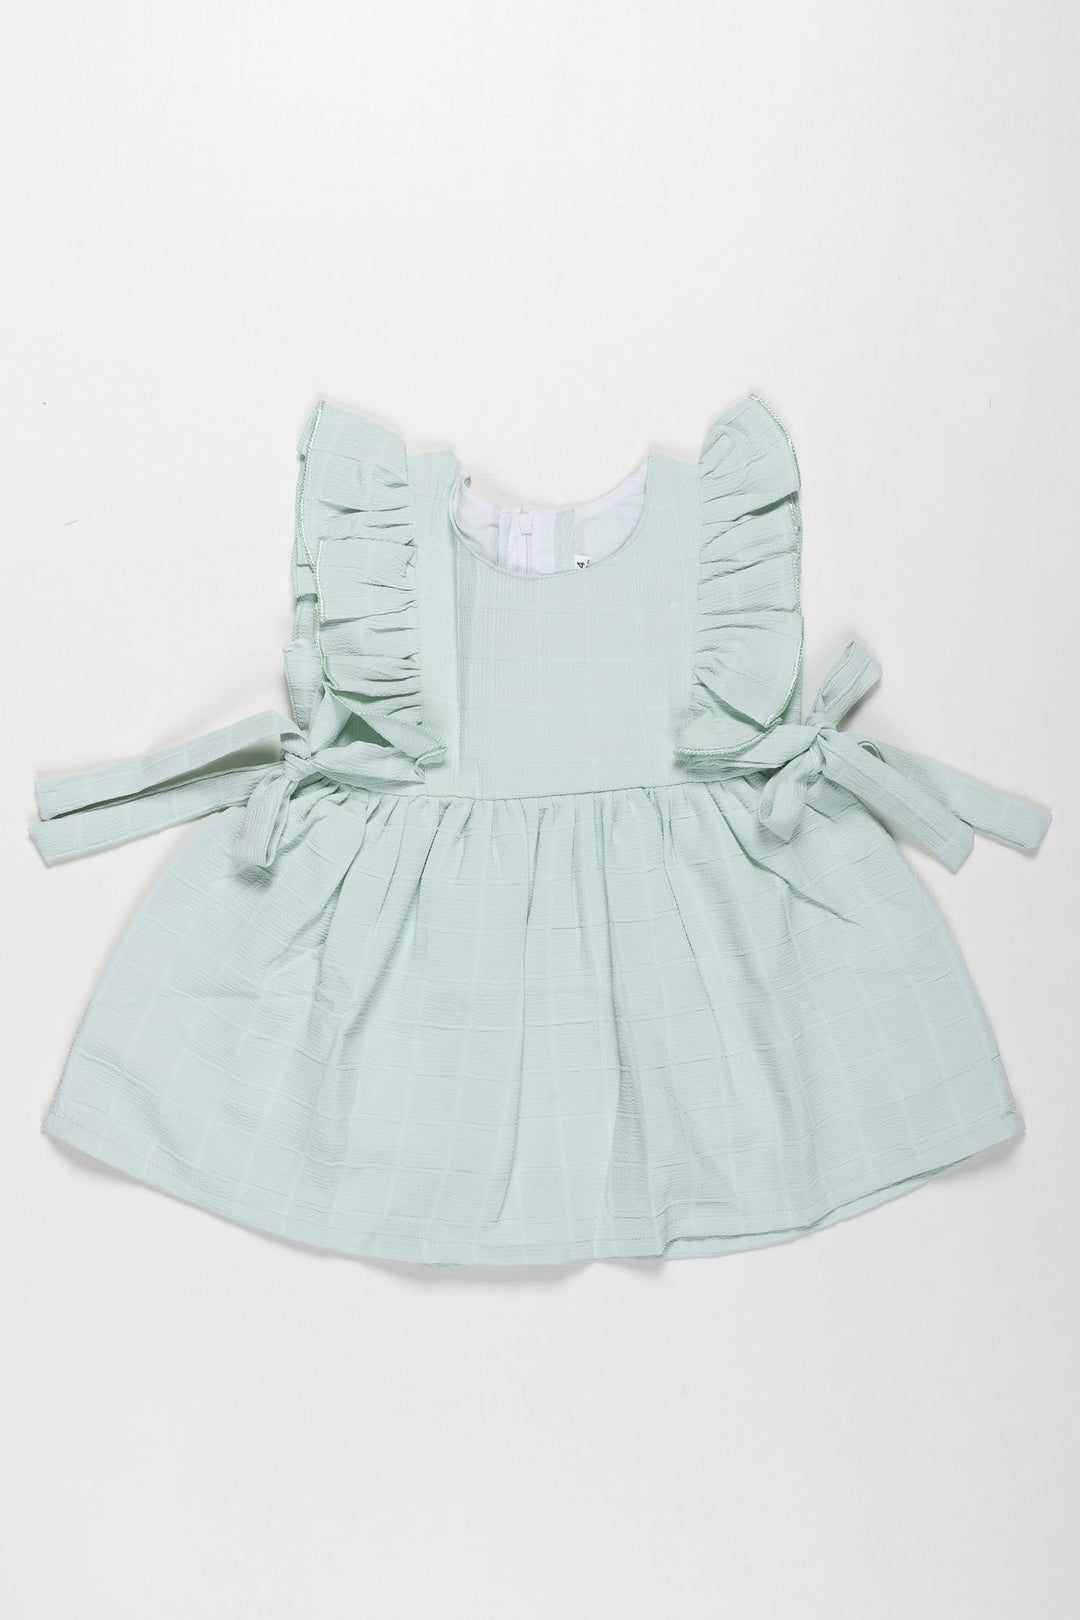 The Nesavu Baby Cotton Frocks Cotton Frock with Geometric Patterns for Baby Girls - Frill-Trimmed Delight Nesavu 14 (6M) / Green / Poly Silk BFJ525A-14 Adorable Frilled Cotton Dress for Infants | Geometric Chic | The Nesavu